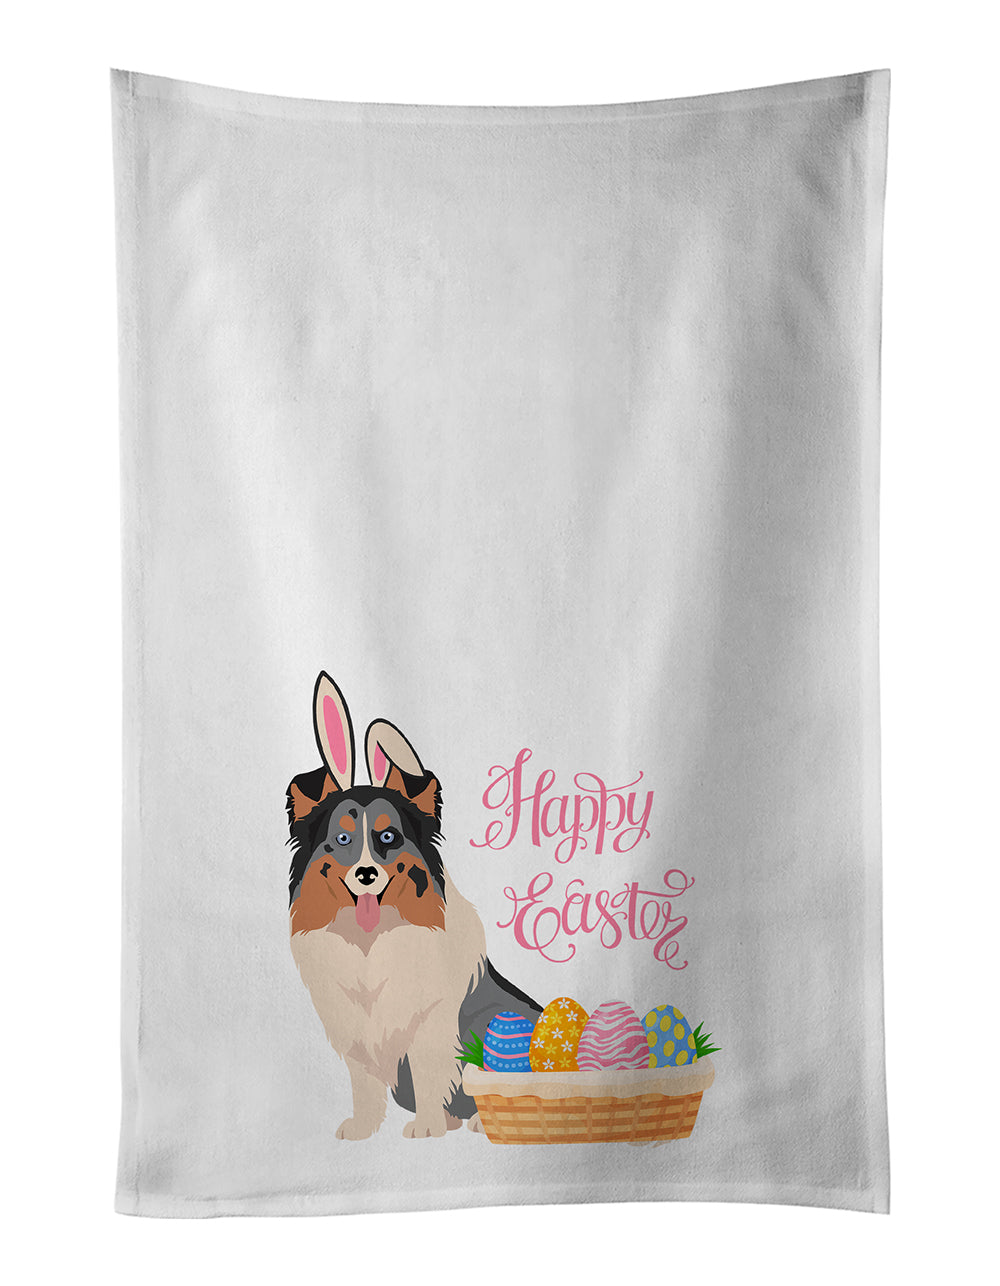 Buy this Blue Merle Sheltie Easter White Kitchen Towel Set of 2 Dish Towels